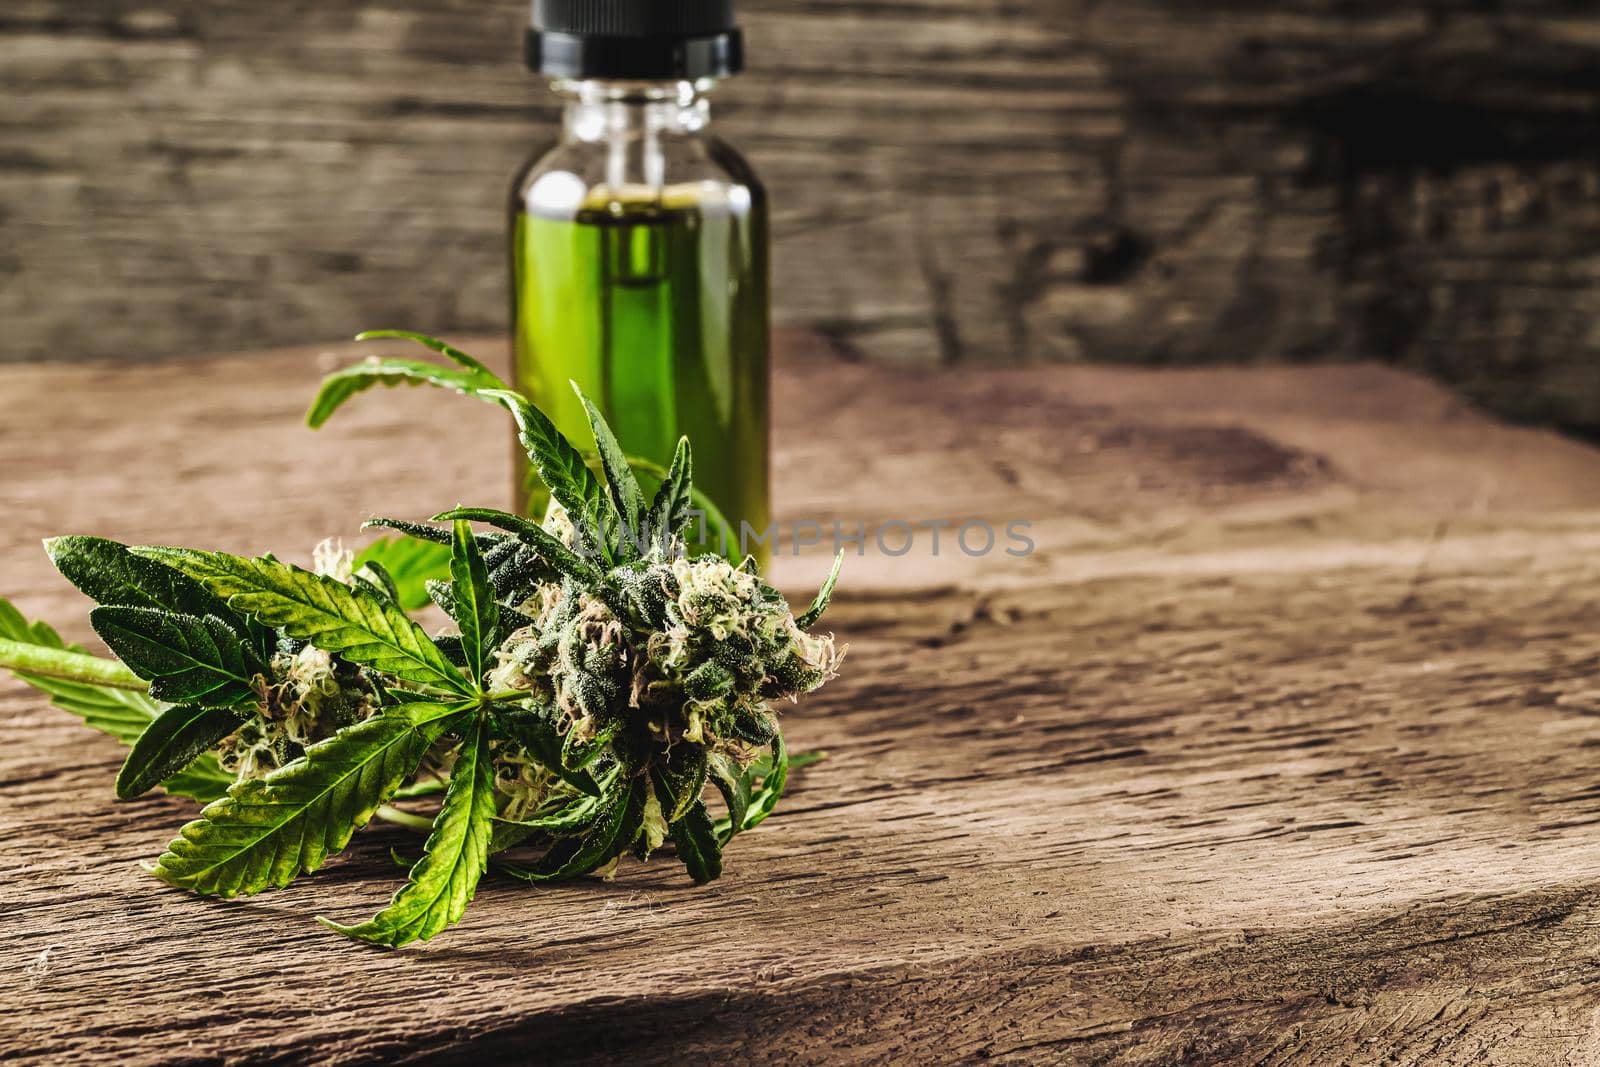 Glass bottle with herbal organic medicine CBD concentrate, droplet dosing a biological and ecological hemp plant herbal pharmaceutical cbd oil from a jar and medical cannabis bud on wooden background. Horizontal orientation.